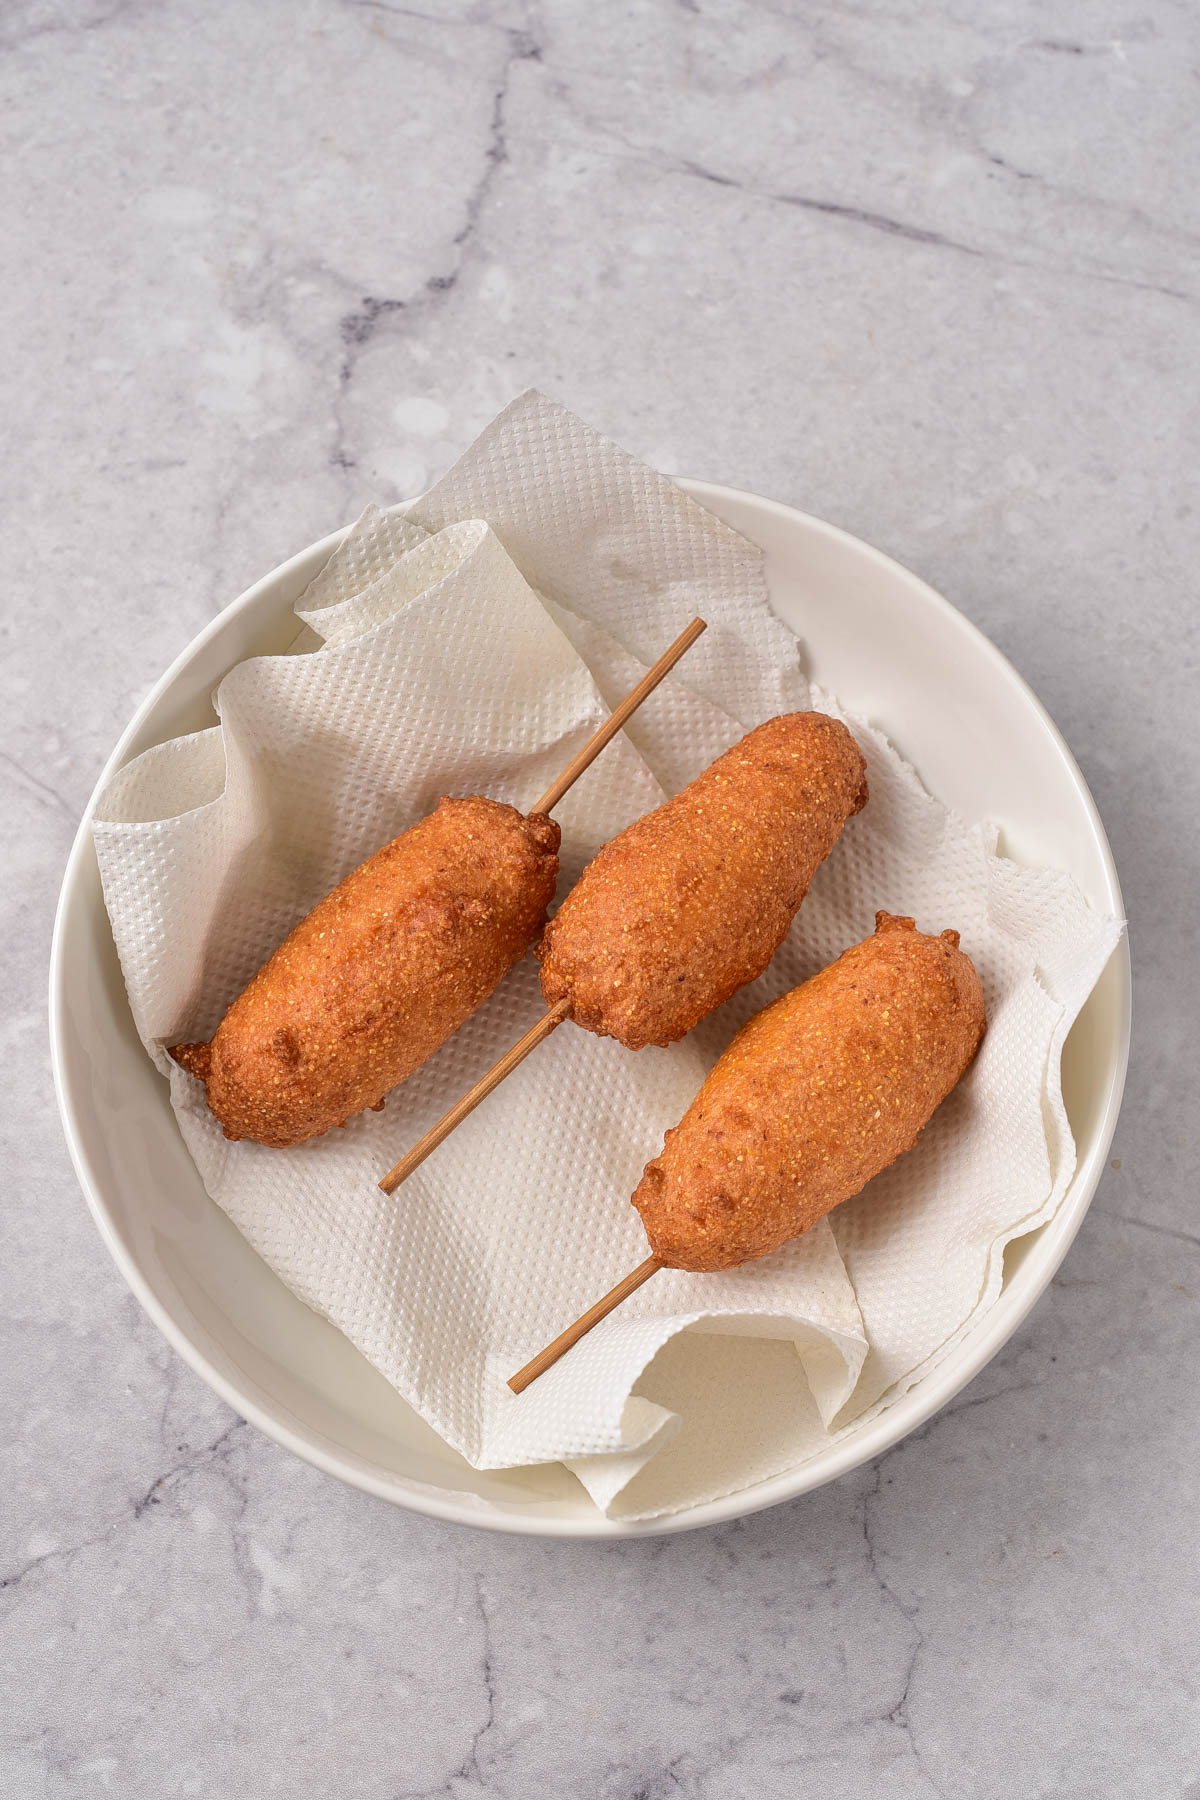 Corn dogs drying out on paper towel